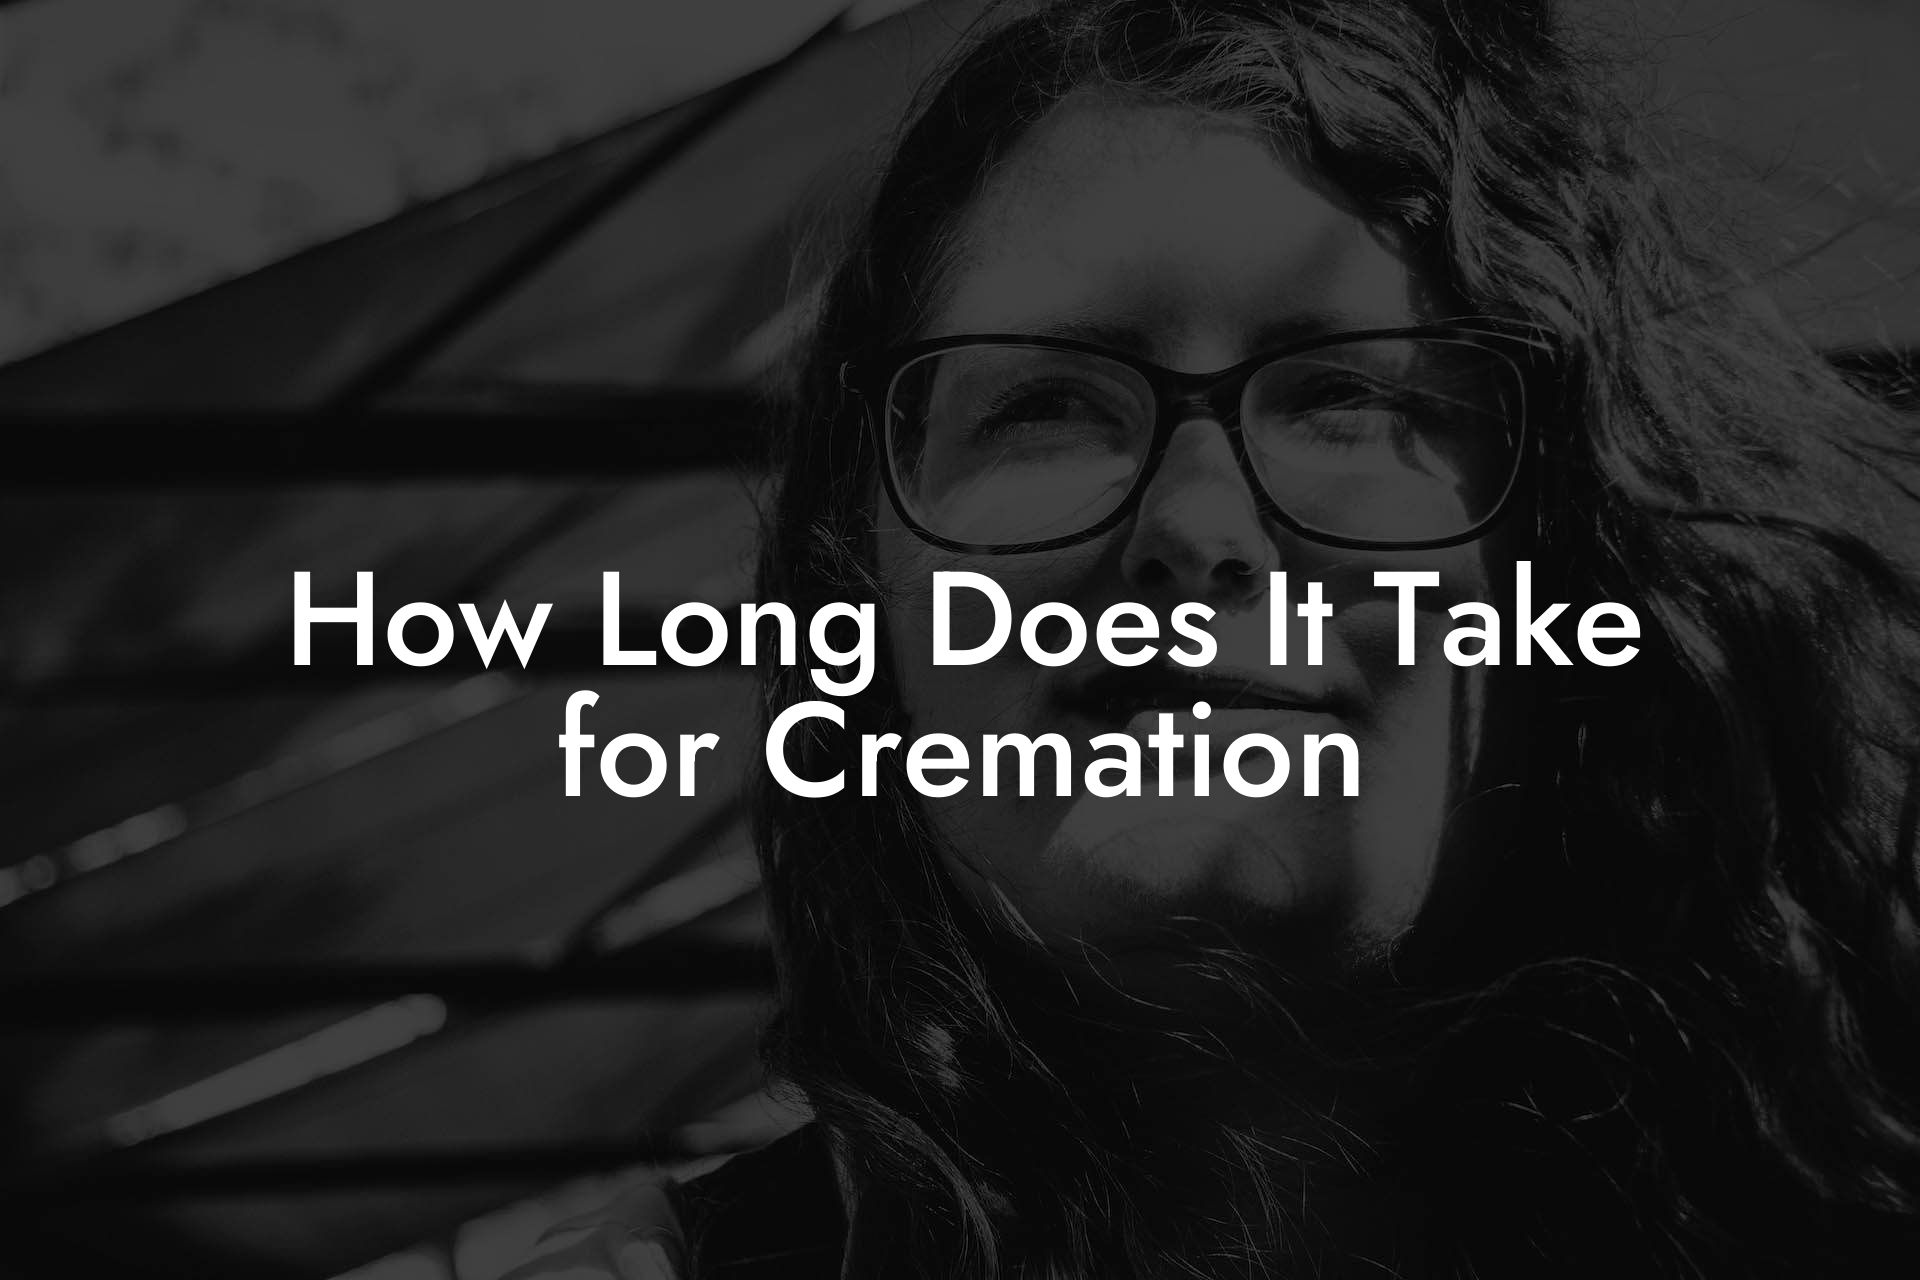 How Long Does It Take for Cremation